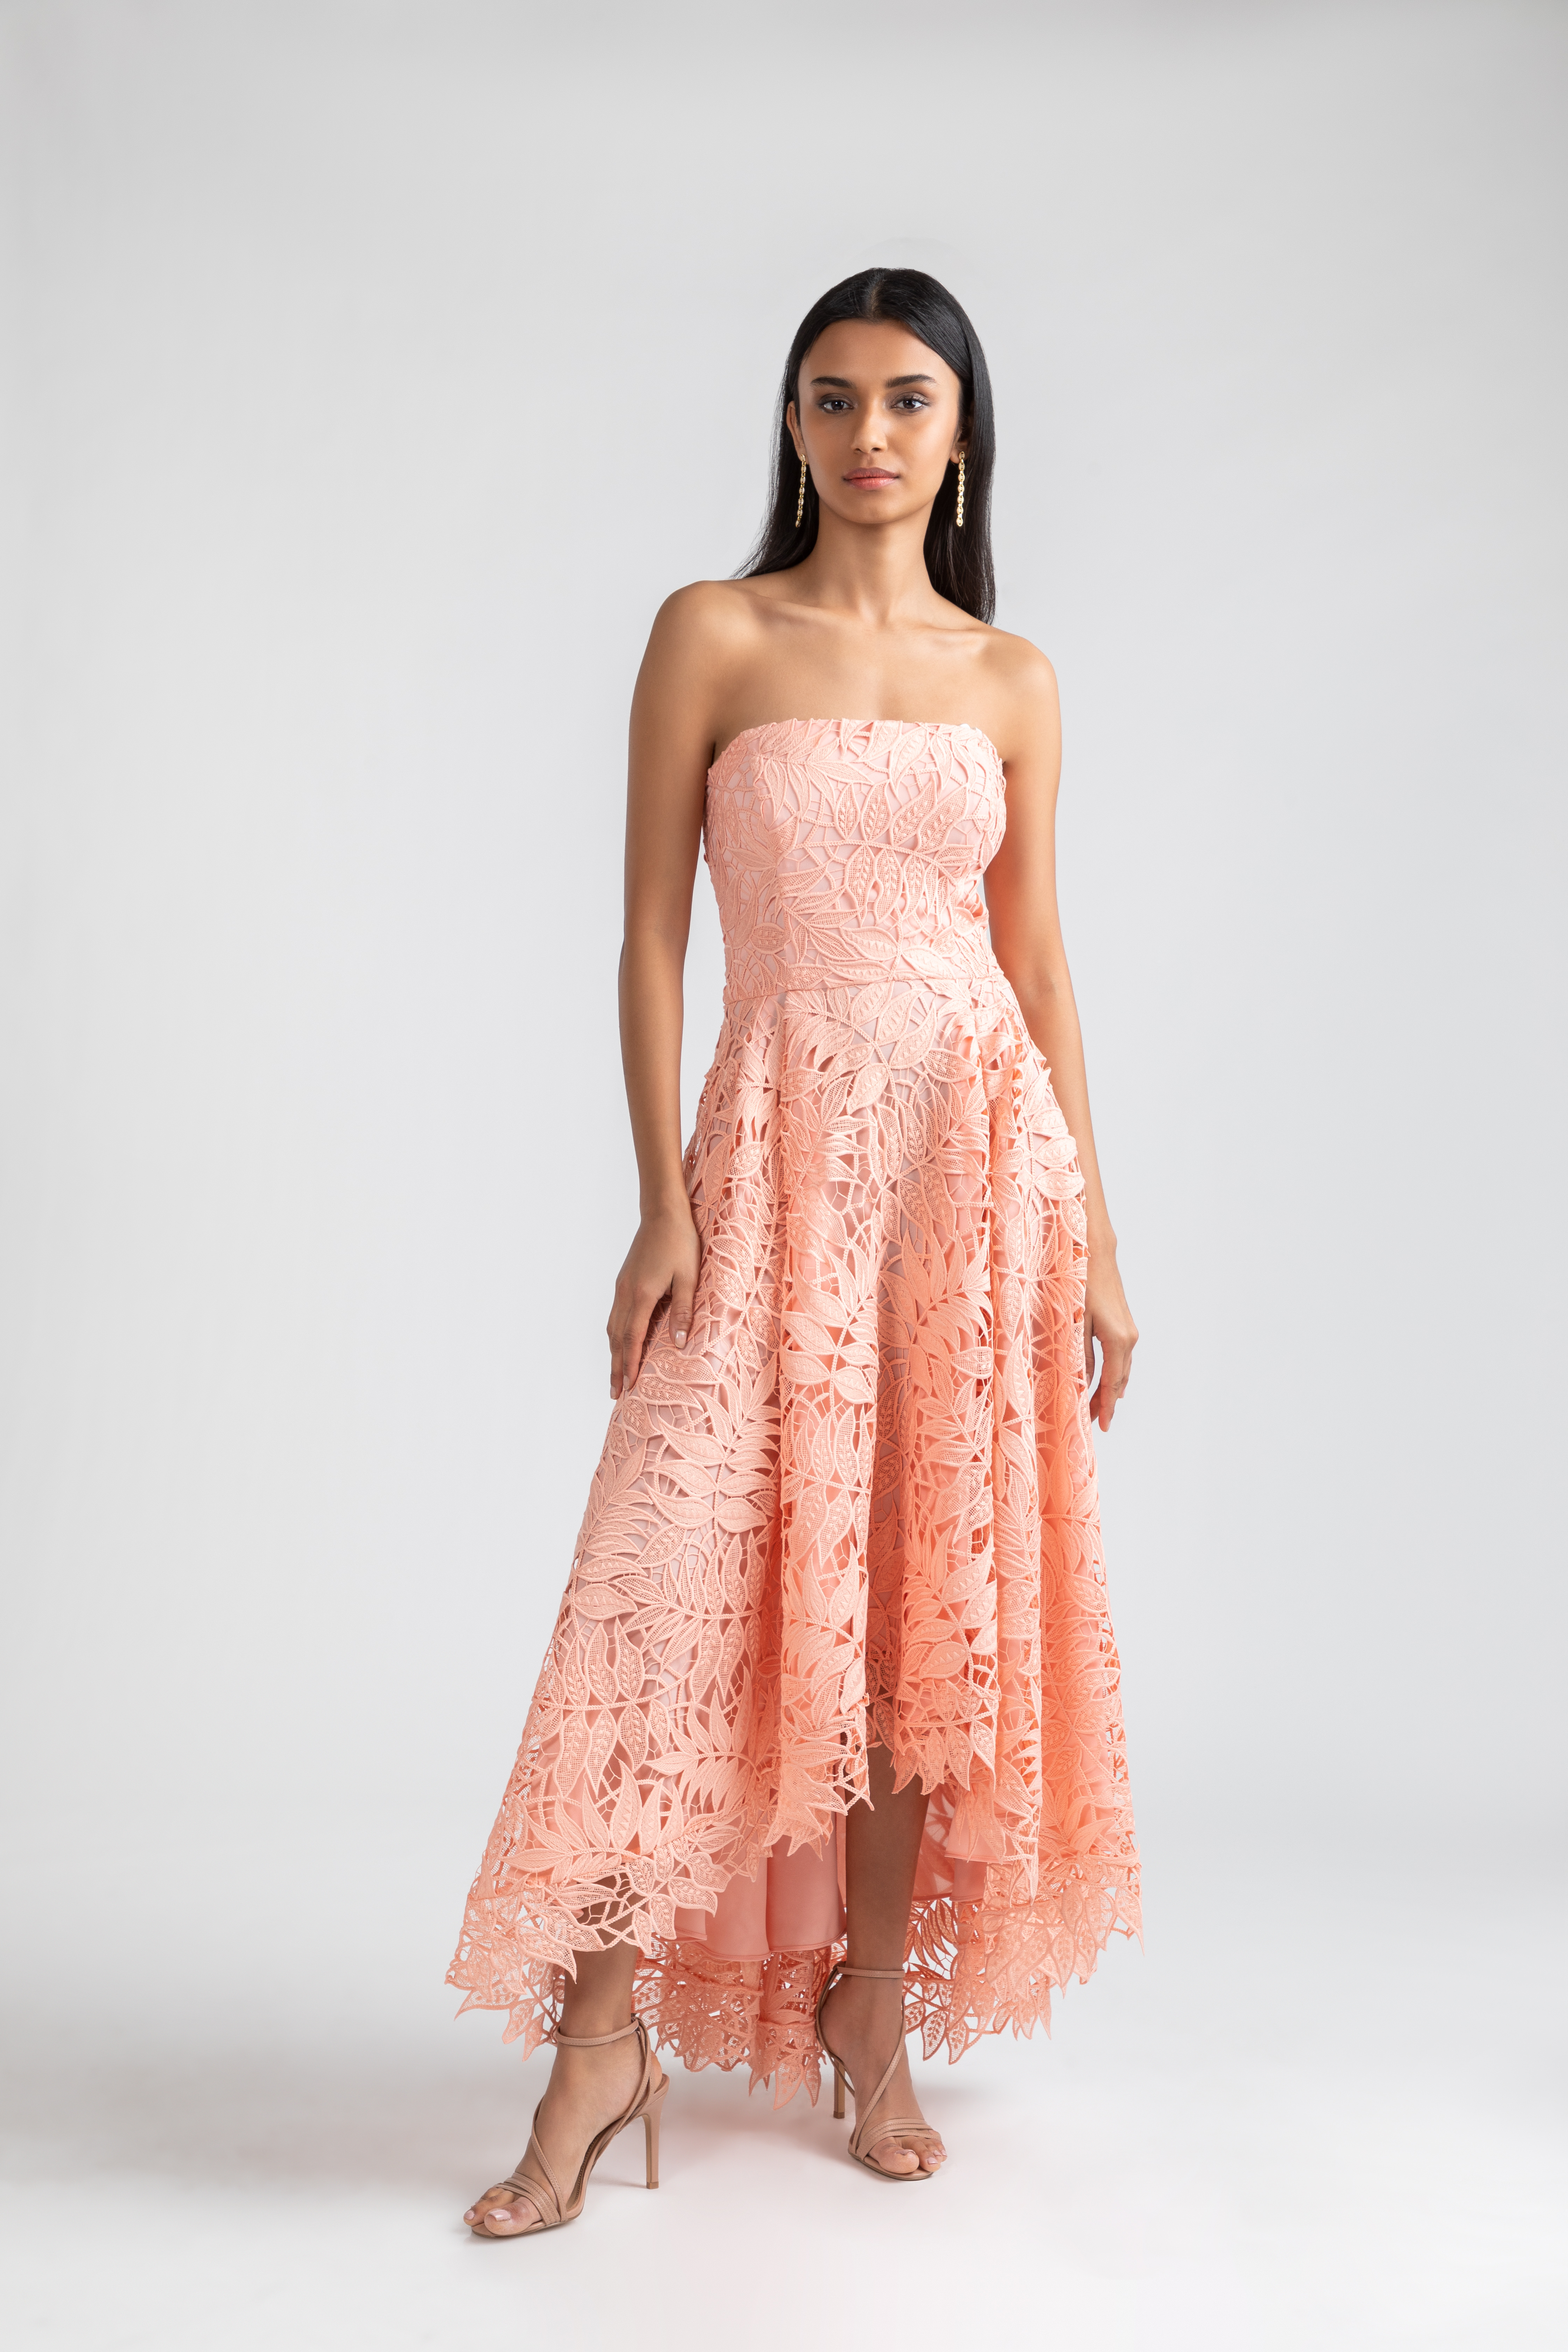 Shoshanna Strapless Embroidered Mesh Gown